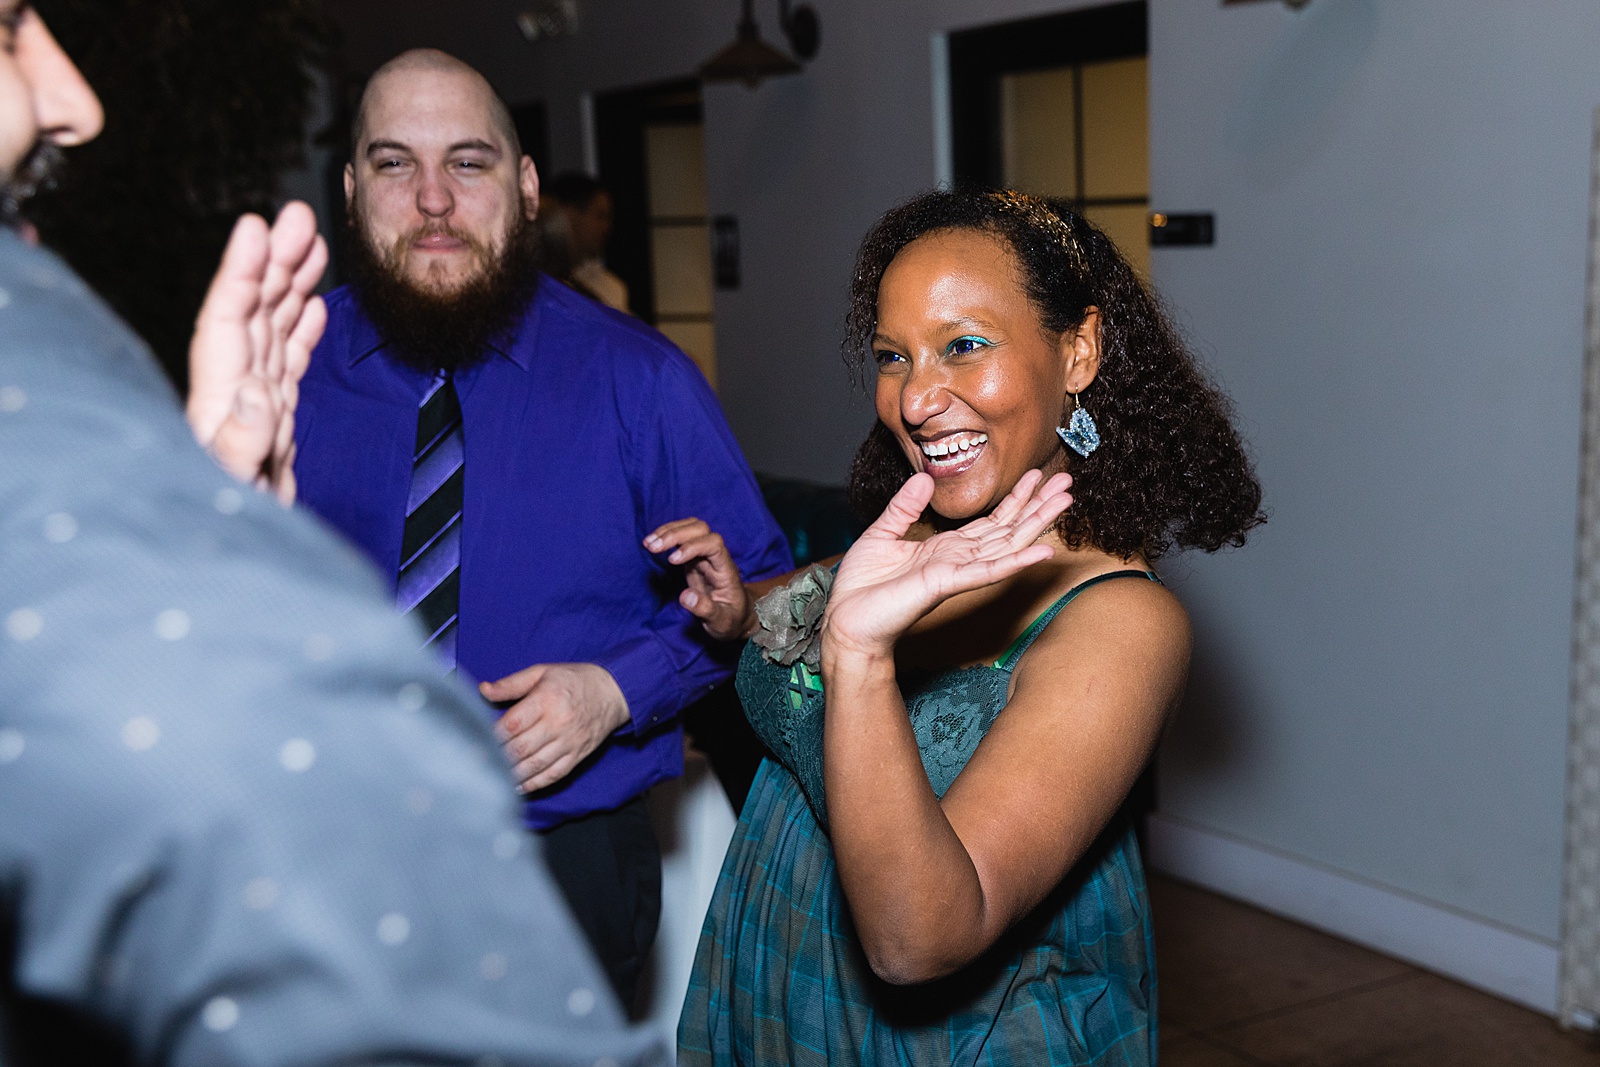 Guests dancing together at Hidden House wedding reception by Chandler wedding photographer PMA Photography